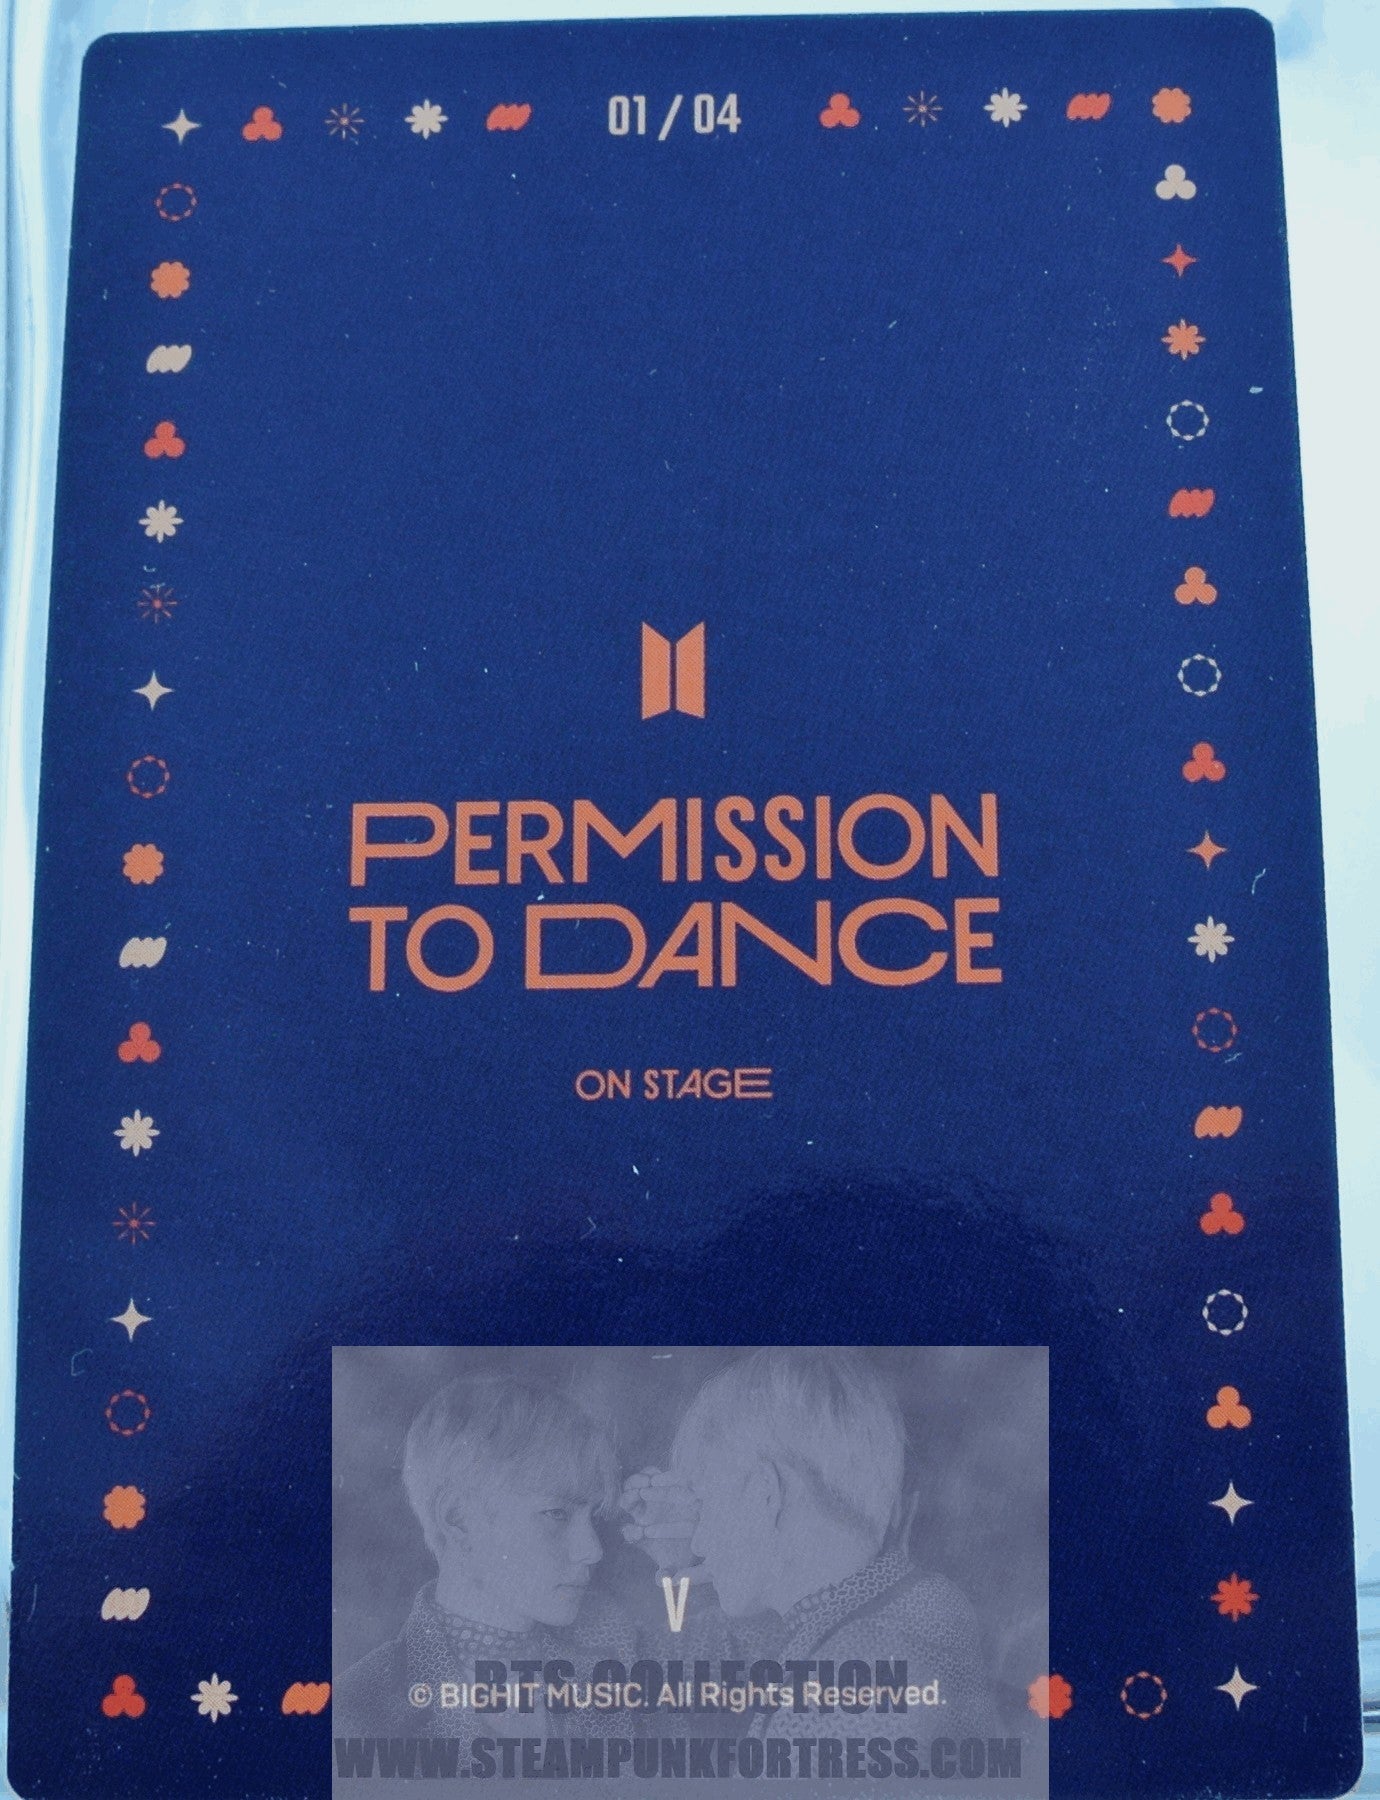 BTS V KIM TAEHYUNG TAE-HYUNG PTD 2022 PERMISSION TO DANCE ON STAGE SEOUL PTD #1 OF 4 PHOTOCARD PHOTO CARD NEW OFFICIAL MERCHANDISE